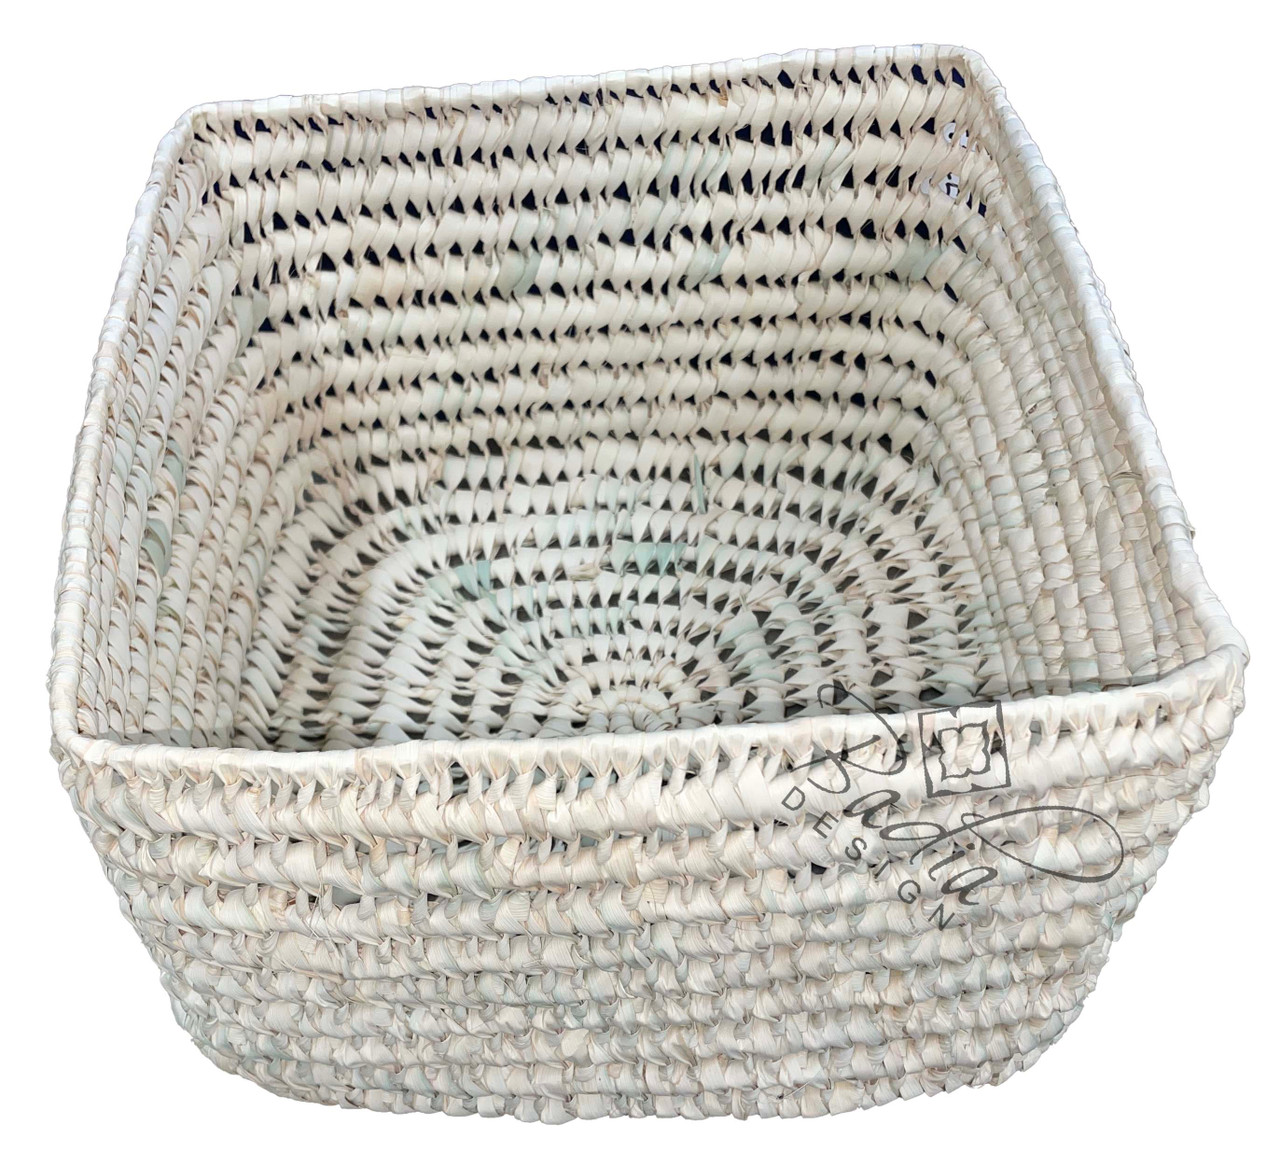 Square Shaped Handwoven Straw Basket - HB028